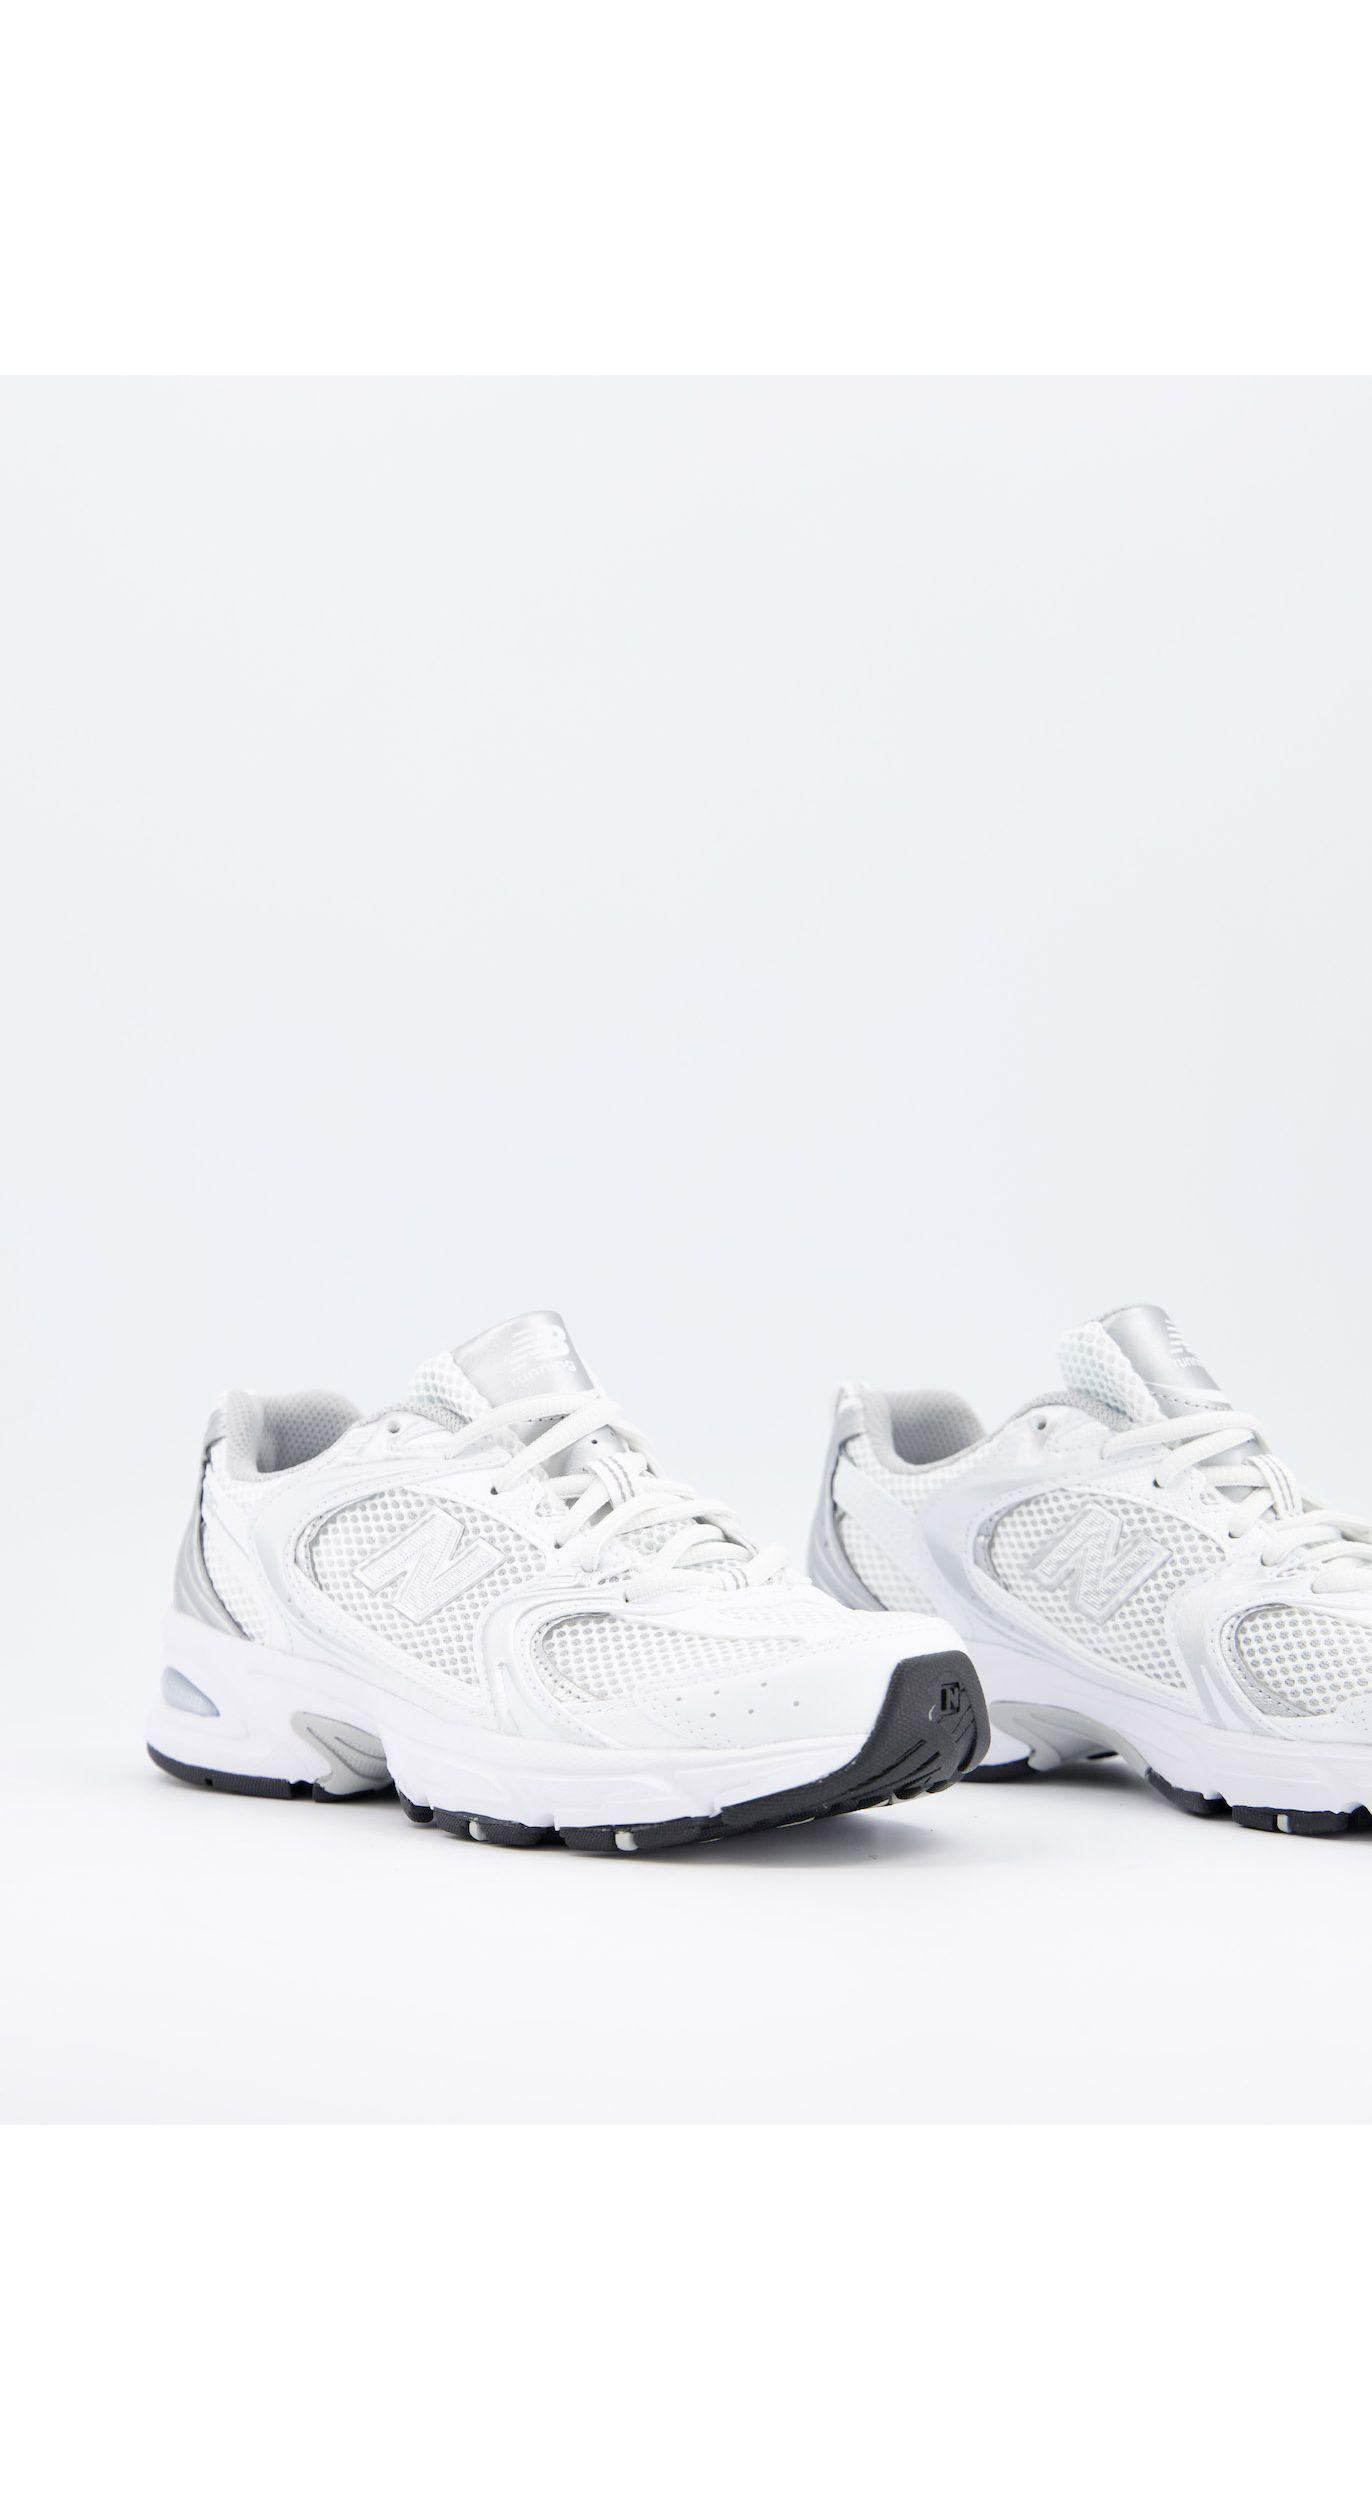 New Balance Rubber 530 Metallic Trainers in White | Lyst